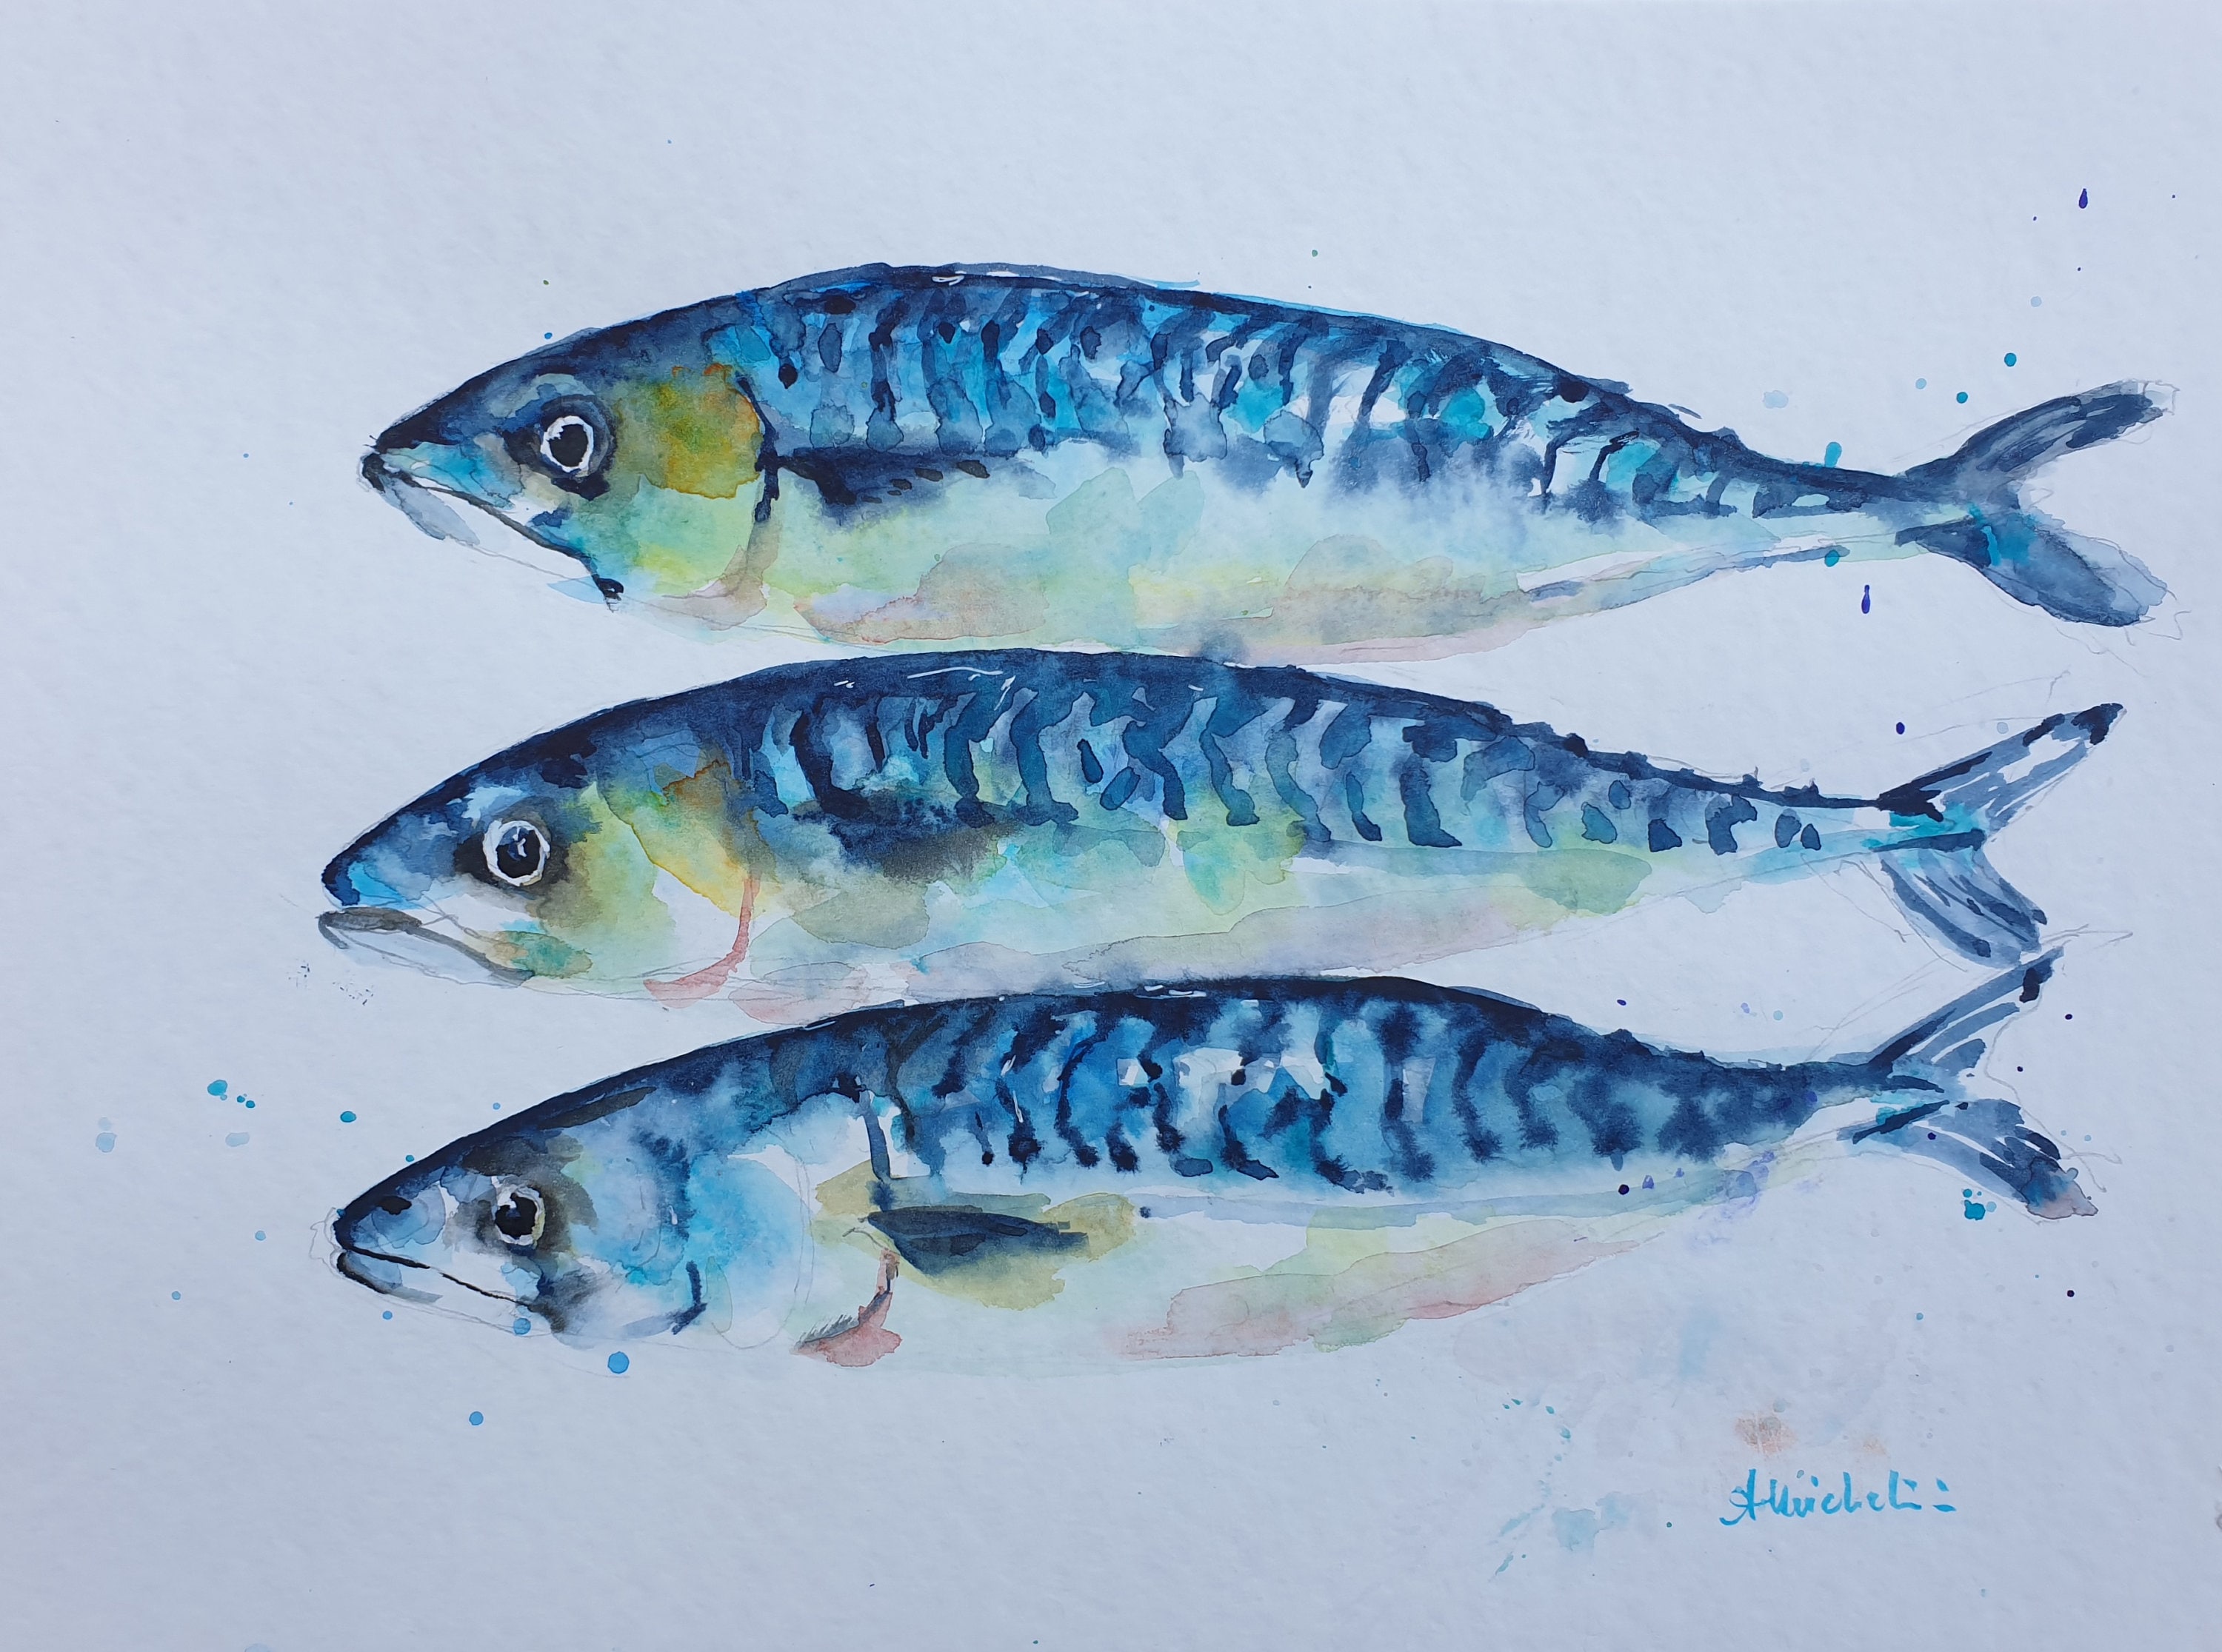 Lure Painting: How to Paint a Mackerel 